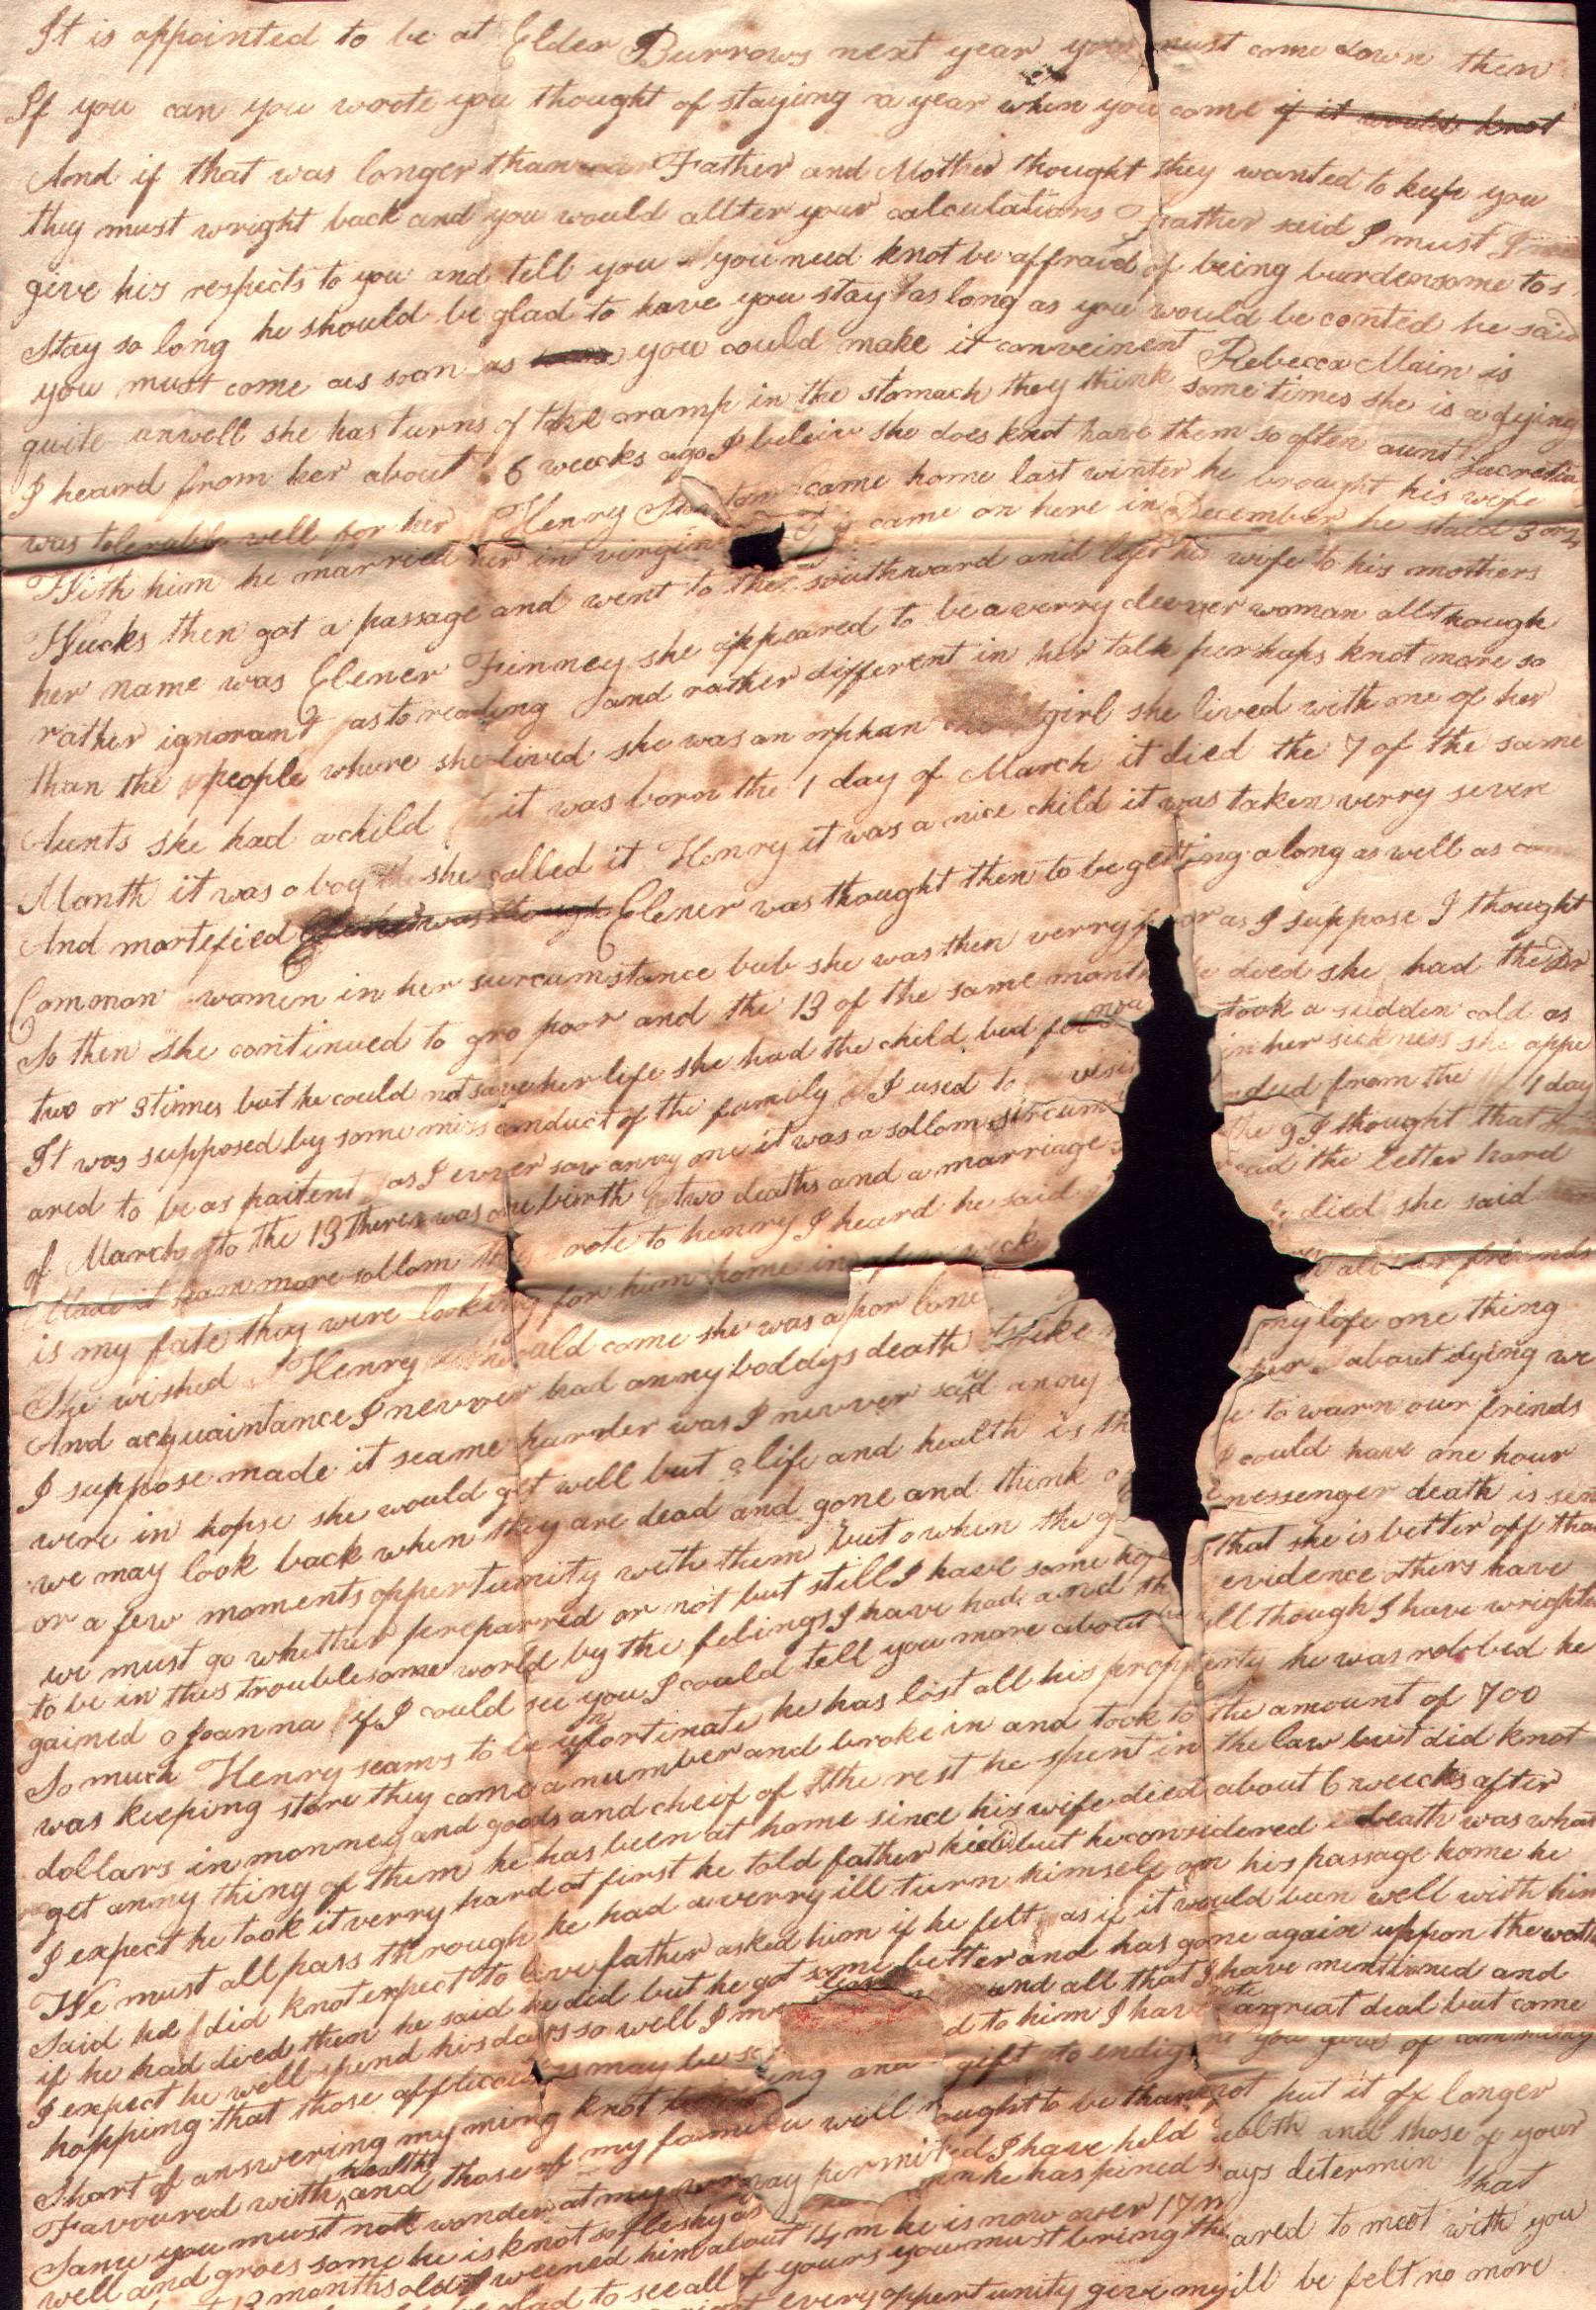 Spicer, Lydia (Stanton) - 1825 Letter to her sister, Joanna (Stanton) Fish in Brooklyn, Cuyahoga County, Ohio - Page 3 of 4 